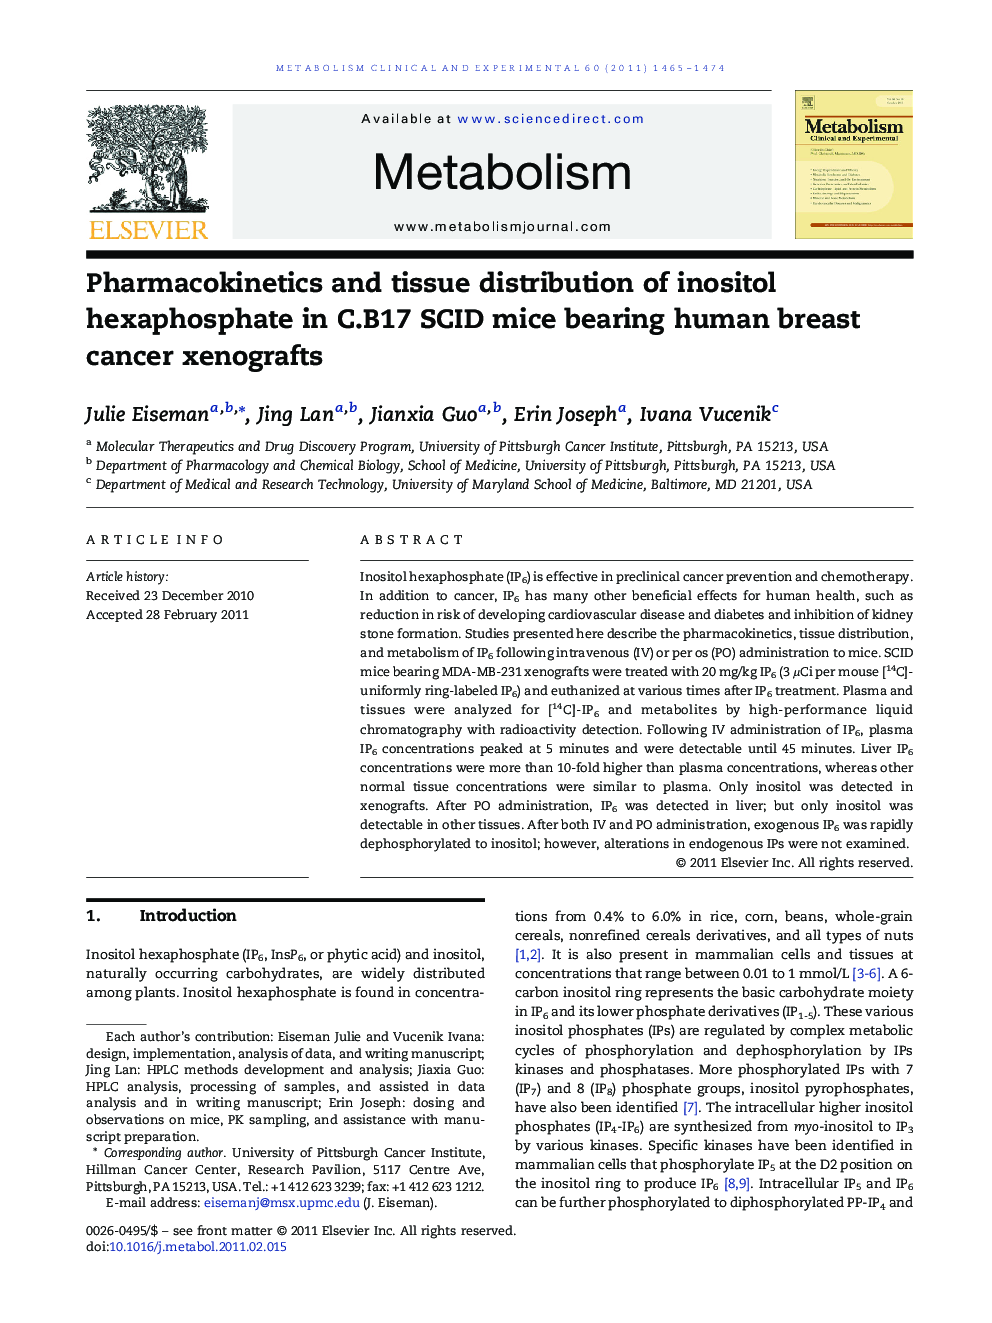 Pharmacokinetics and tissue distribution of inositol hexaphosphate in C.B17 SCID mice bearing human breast cancer xenografts